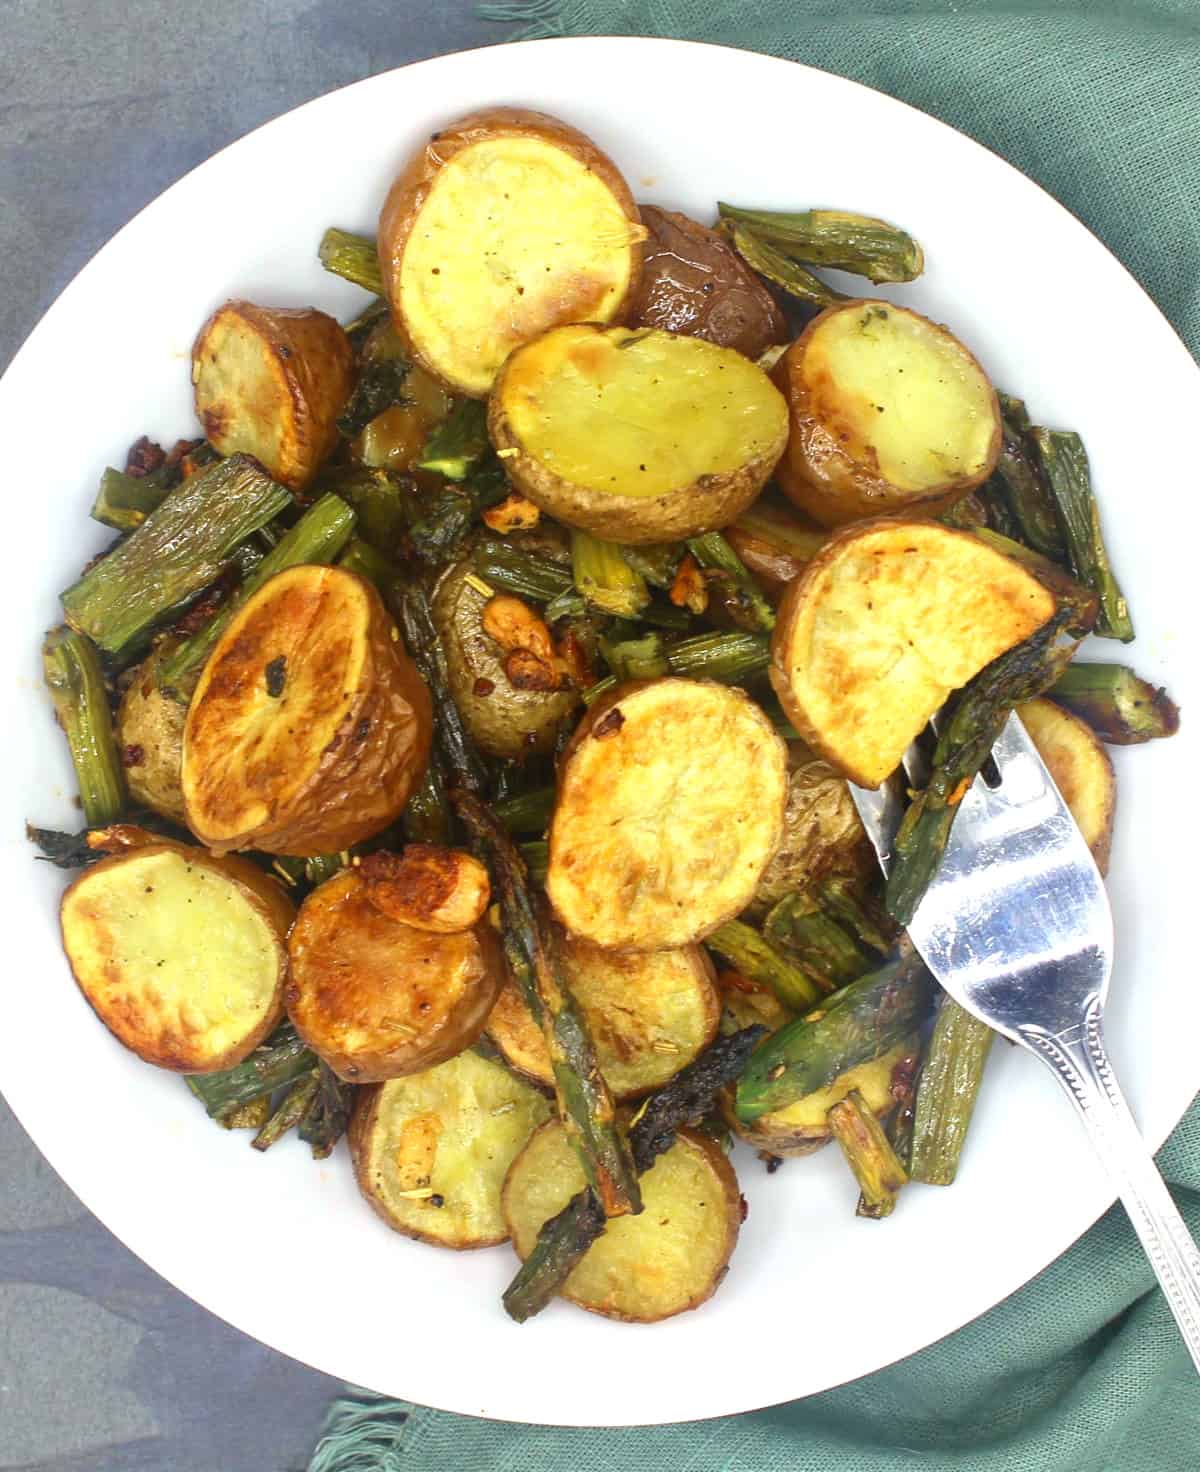 Roasted asparagus and potatoes in white bowl with fork.